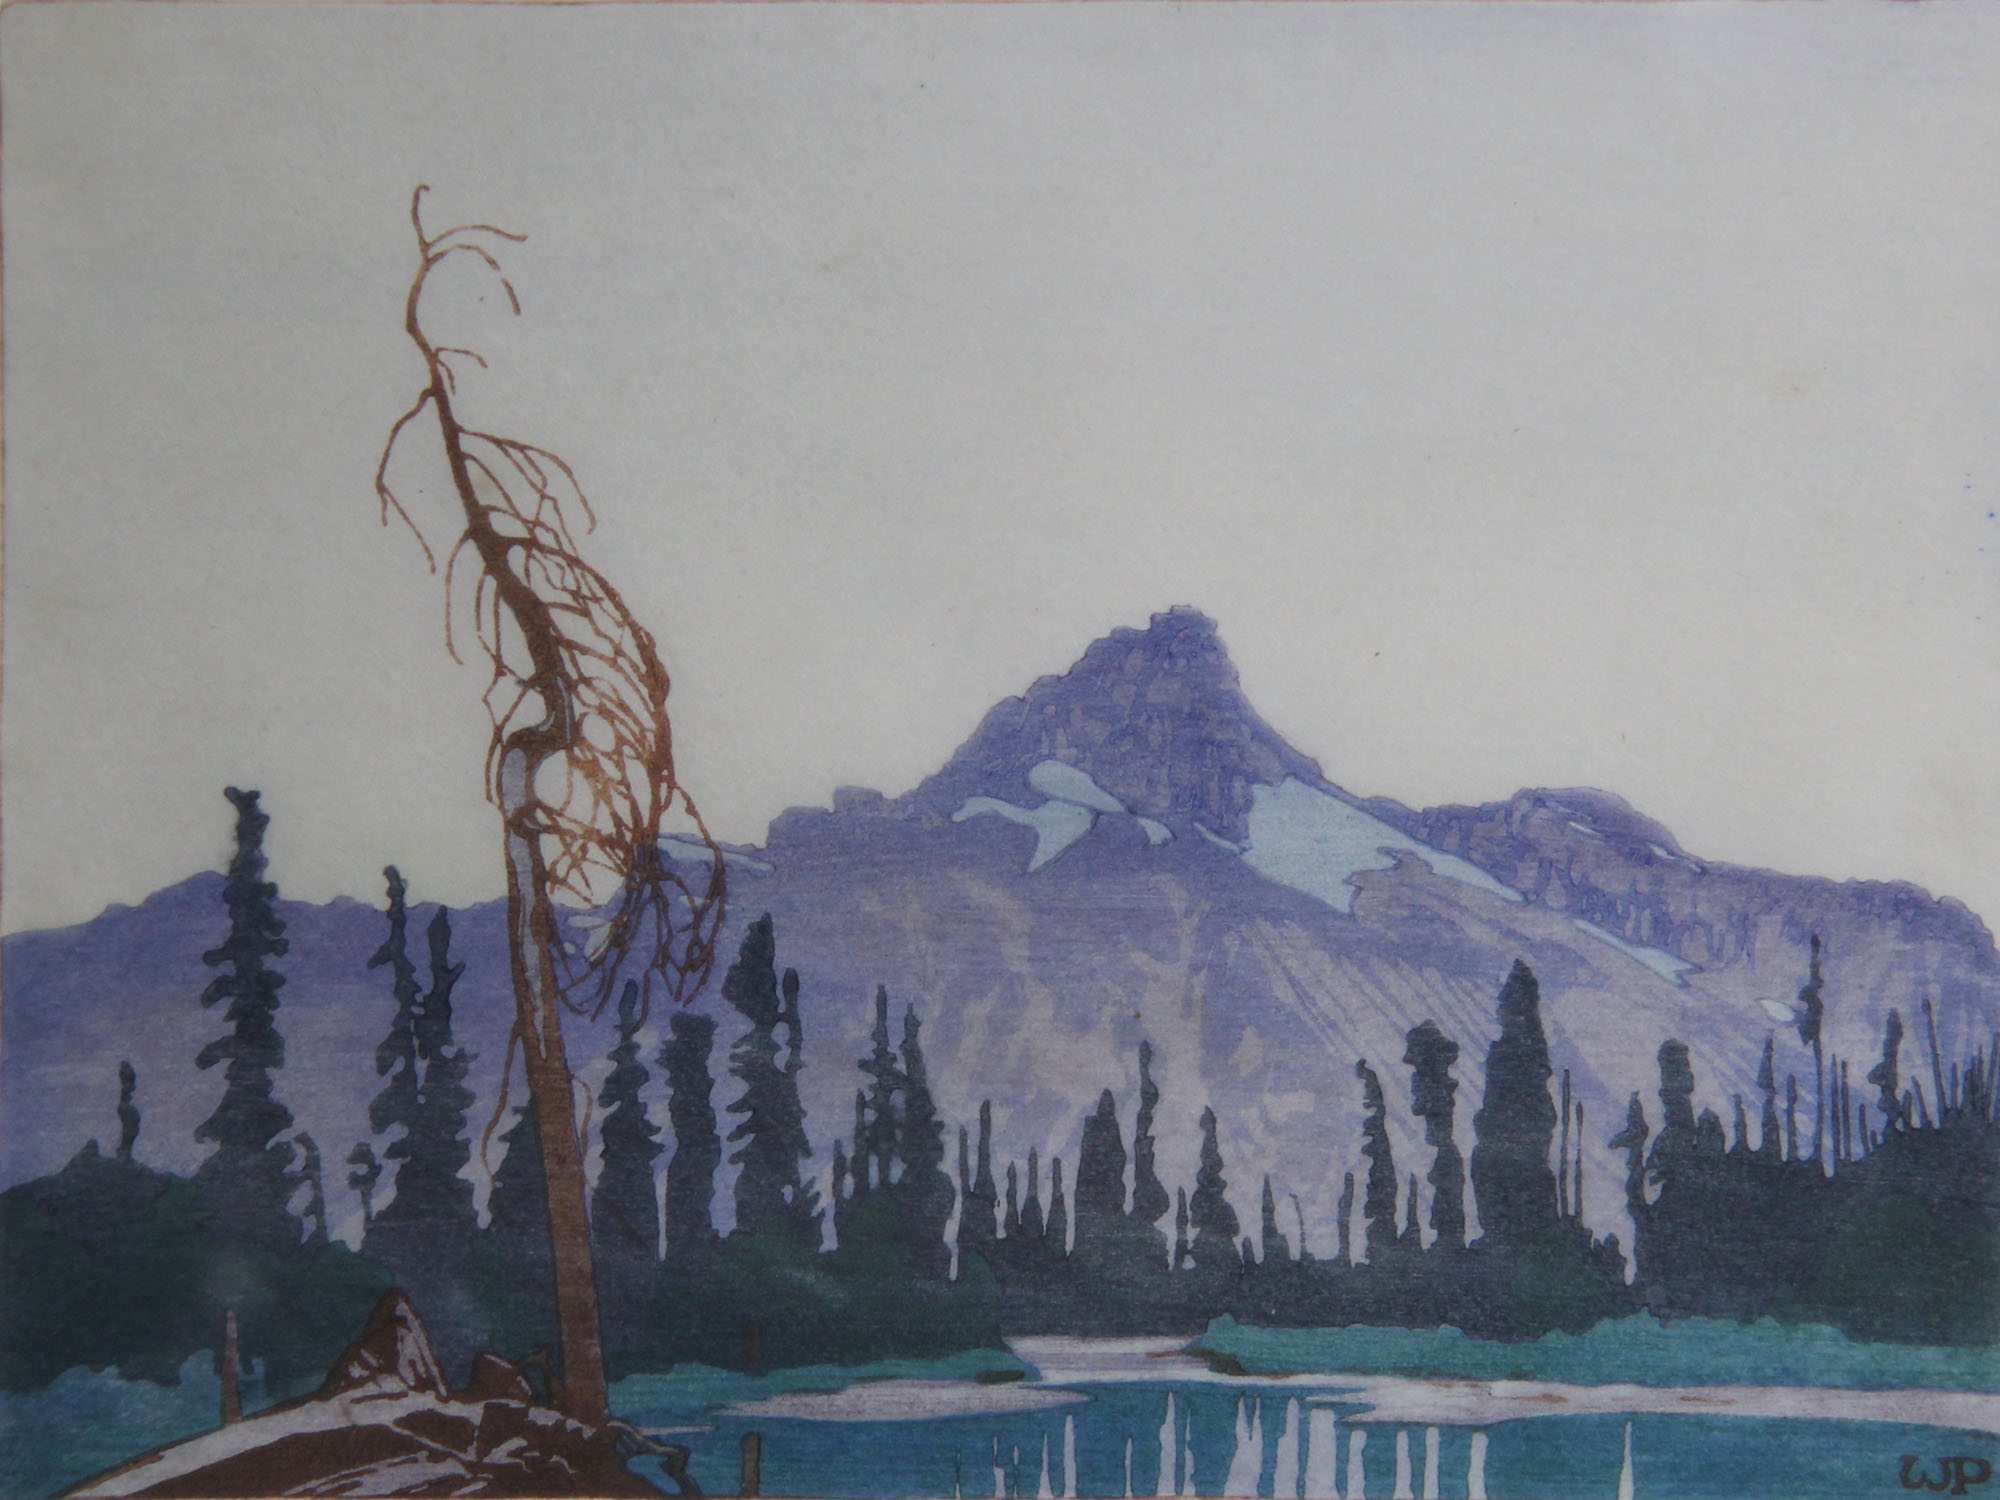 Woodcut print depicting a lake with an old dead tree in the foreground and a mountain in the background